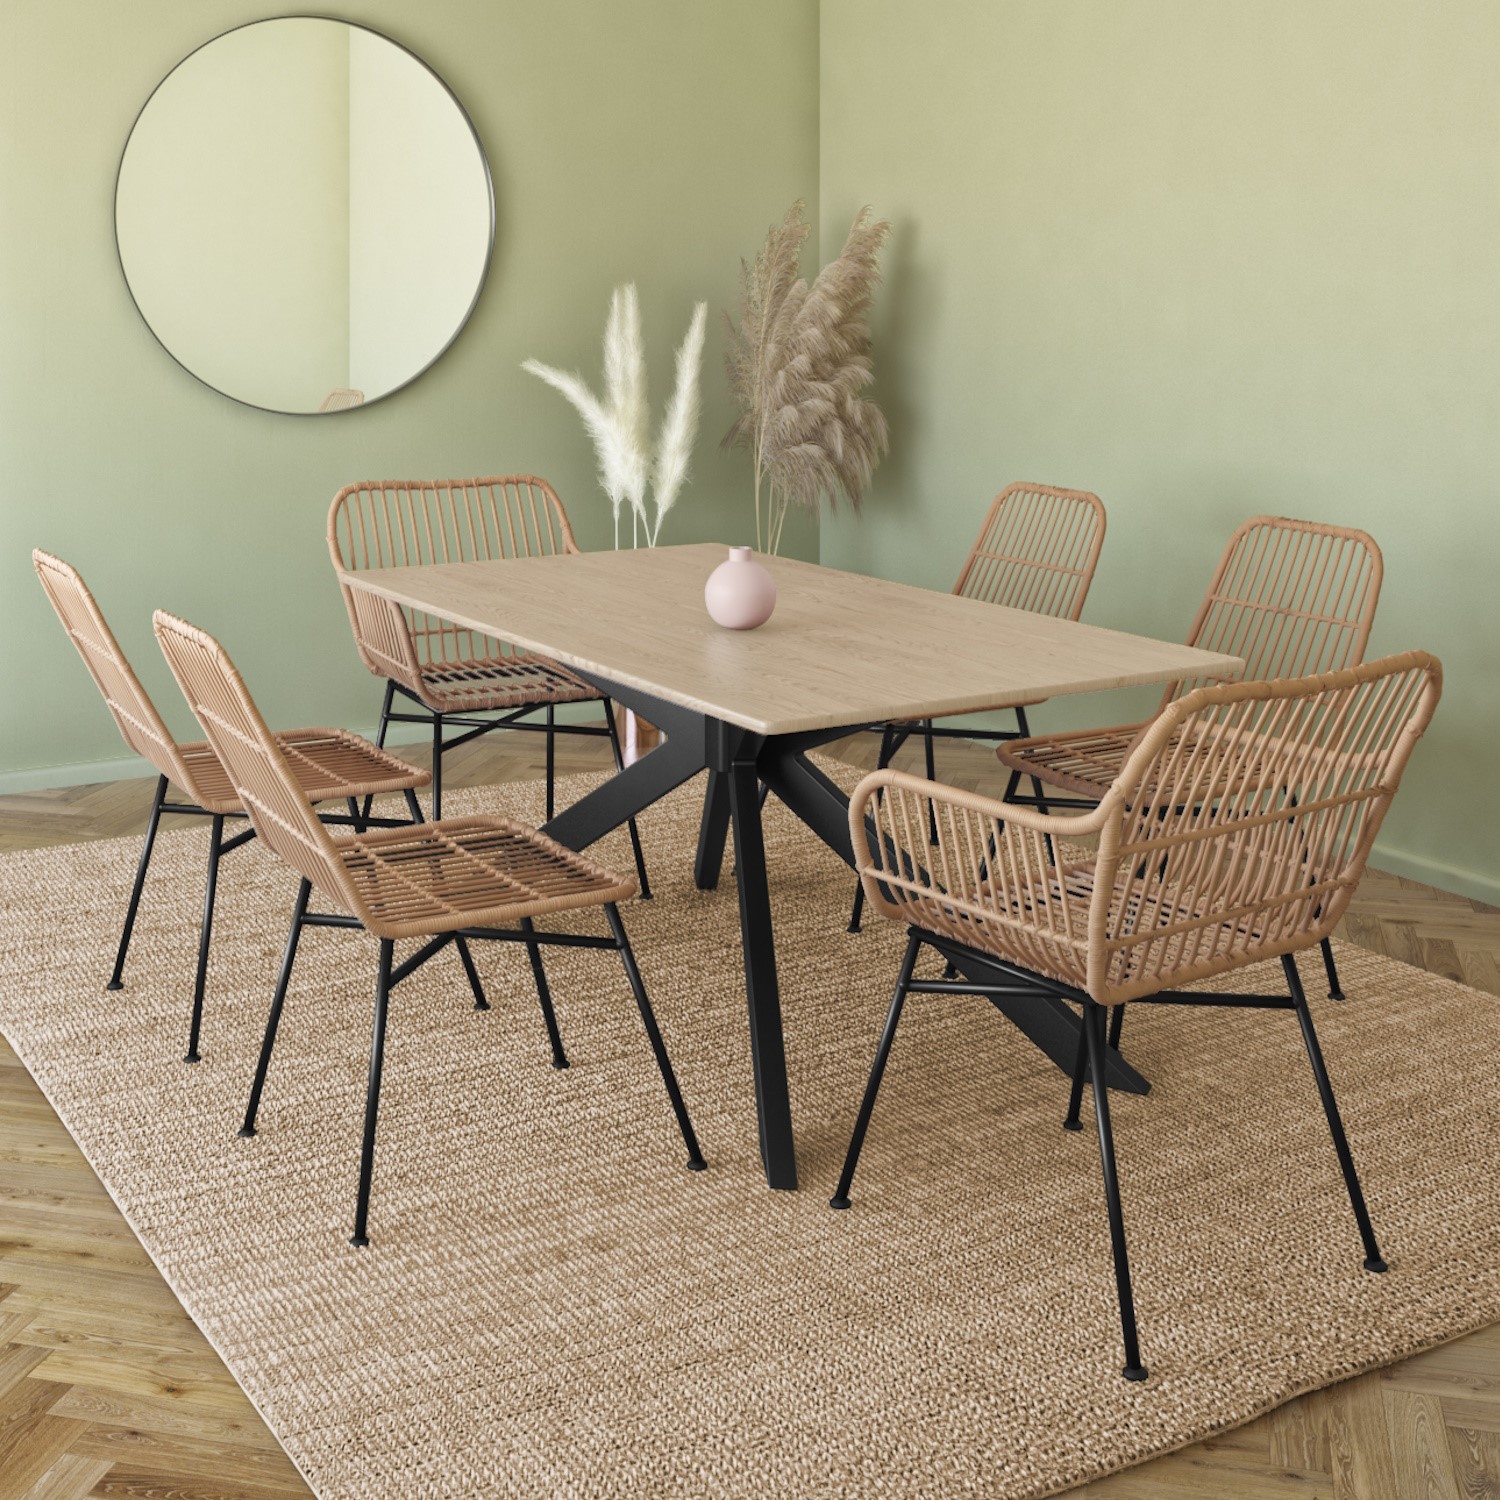 Photo of Light oak dining table with 6 brown rattan dining chairs - carson